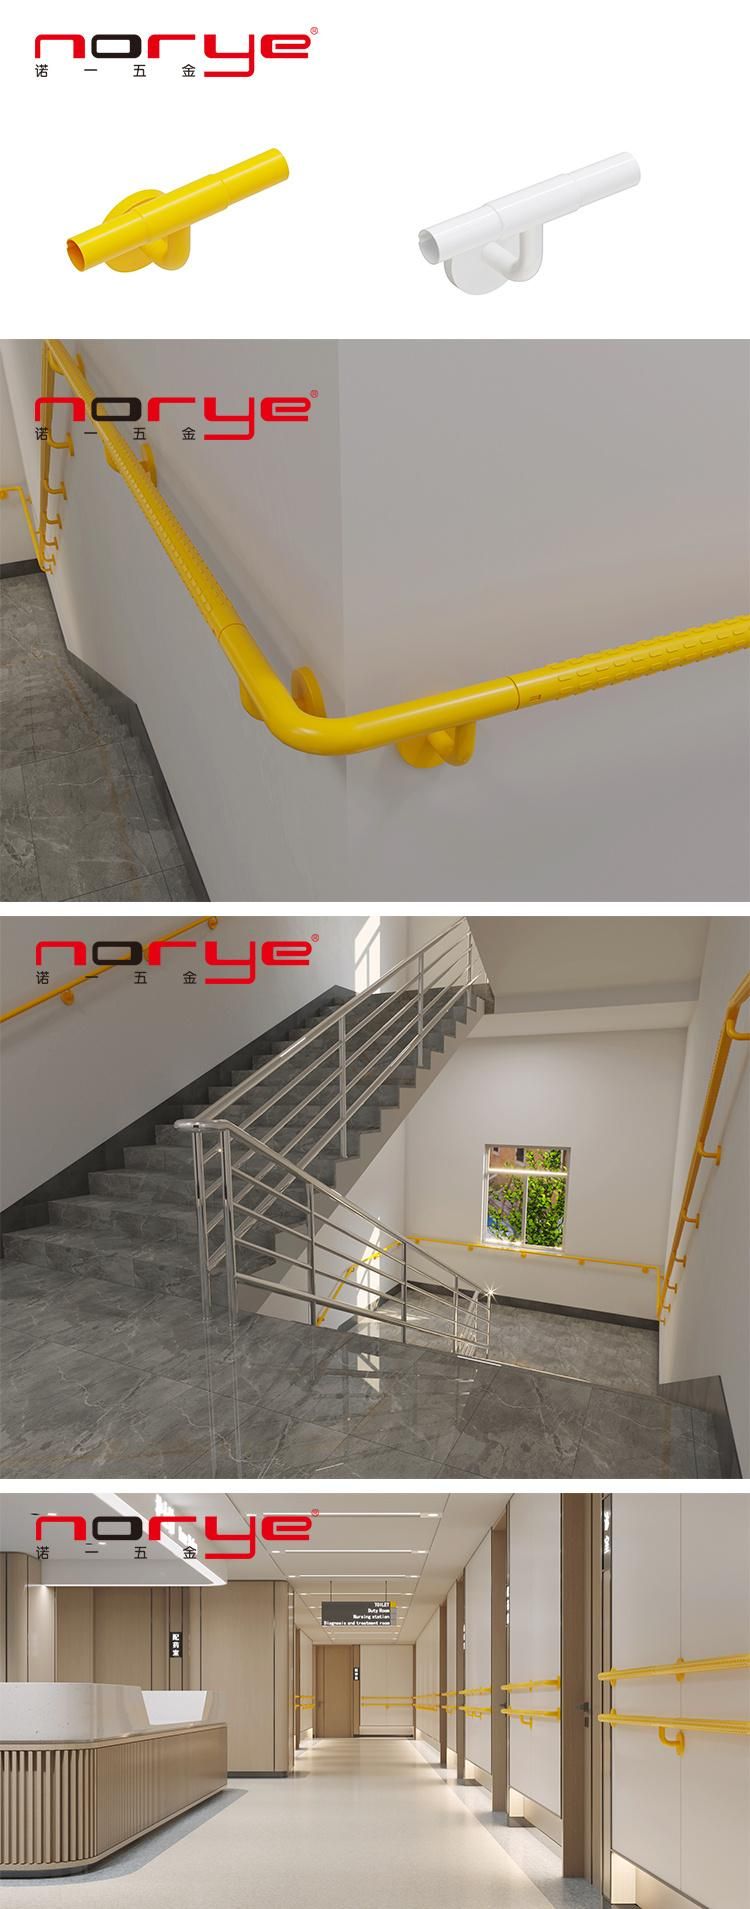 Disabled Safety Handrail Stainless Steel Toilet Grab Bar Balustrades Handrail Link Foot